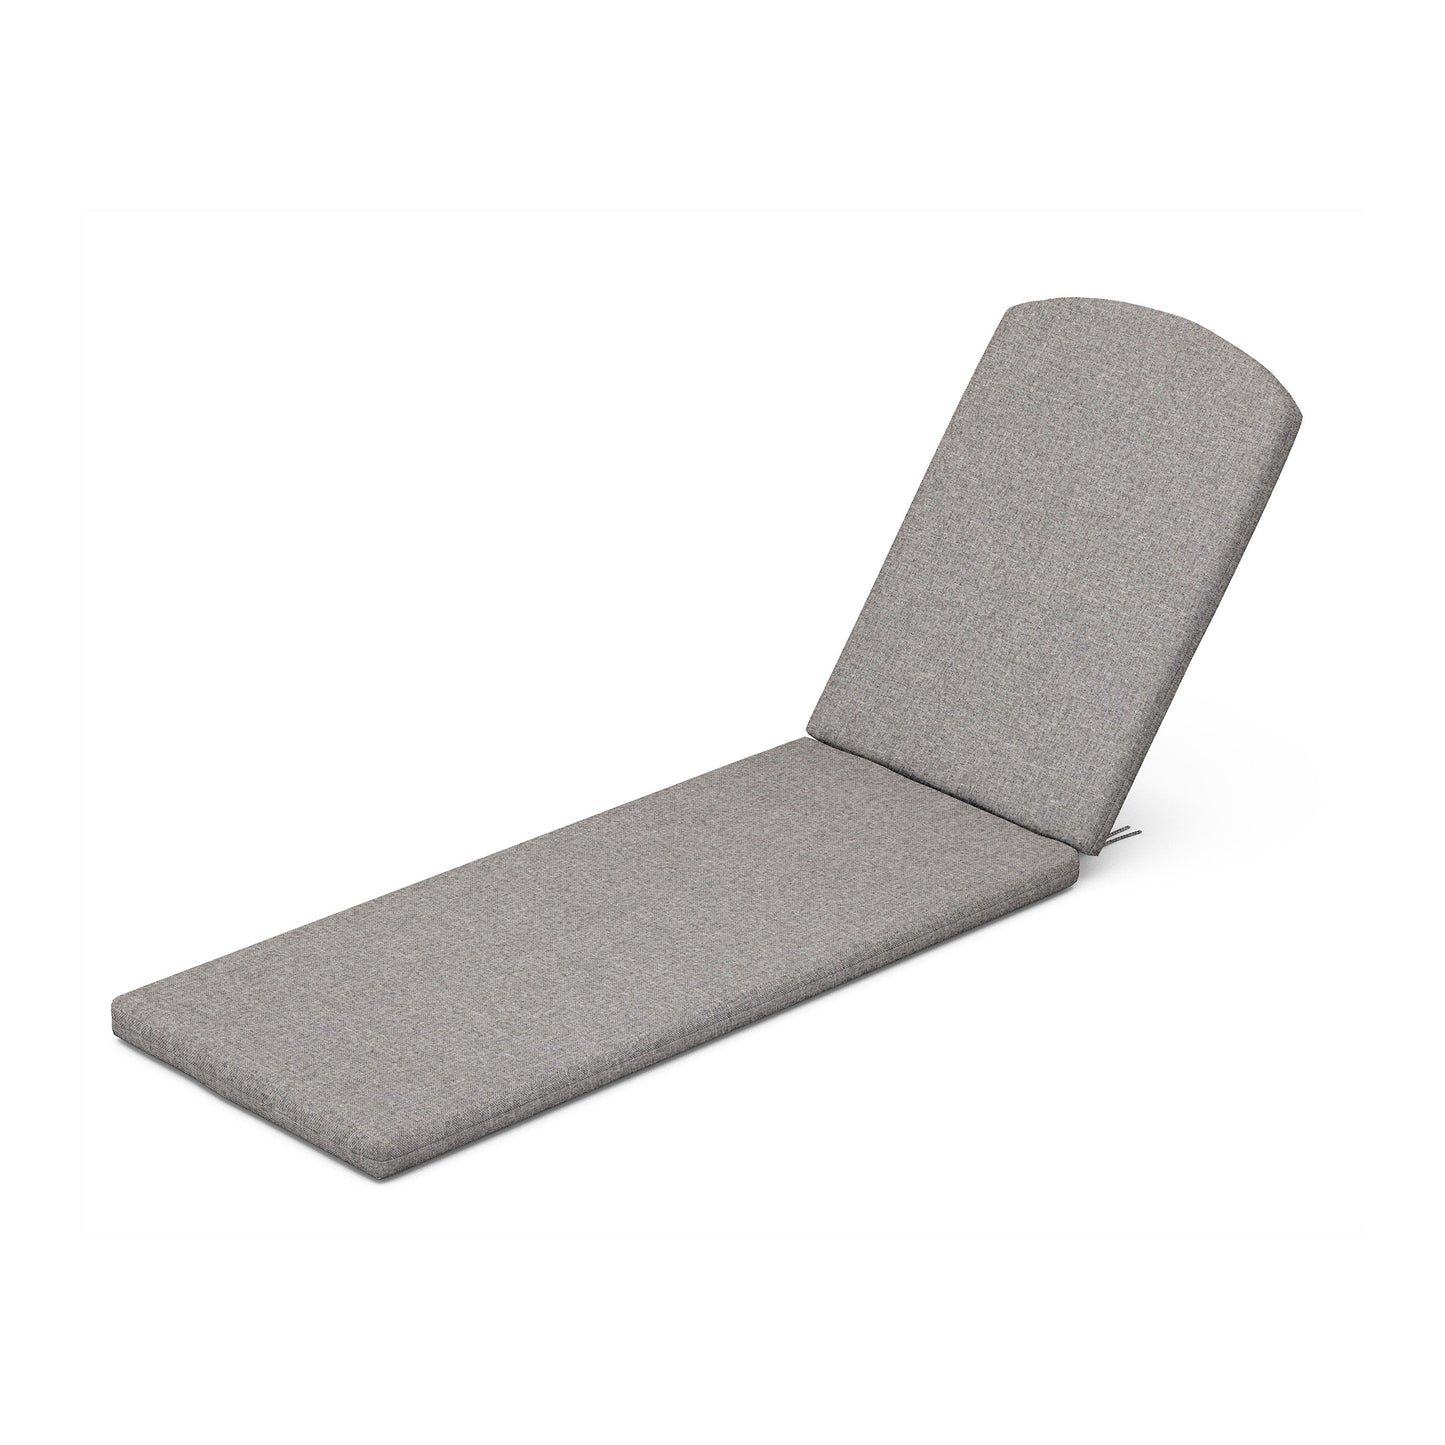 A modern gray POLYWOOD® XPWF0004 - Full Seat Cushion on a white background, featuring thick padding and a slightly raised headrest.